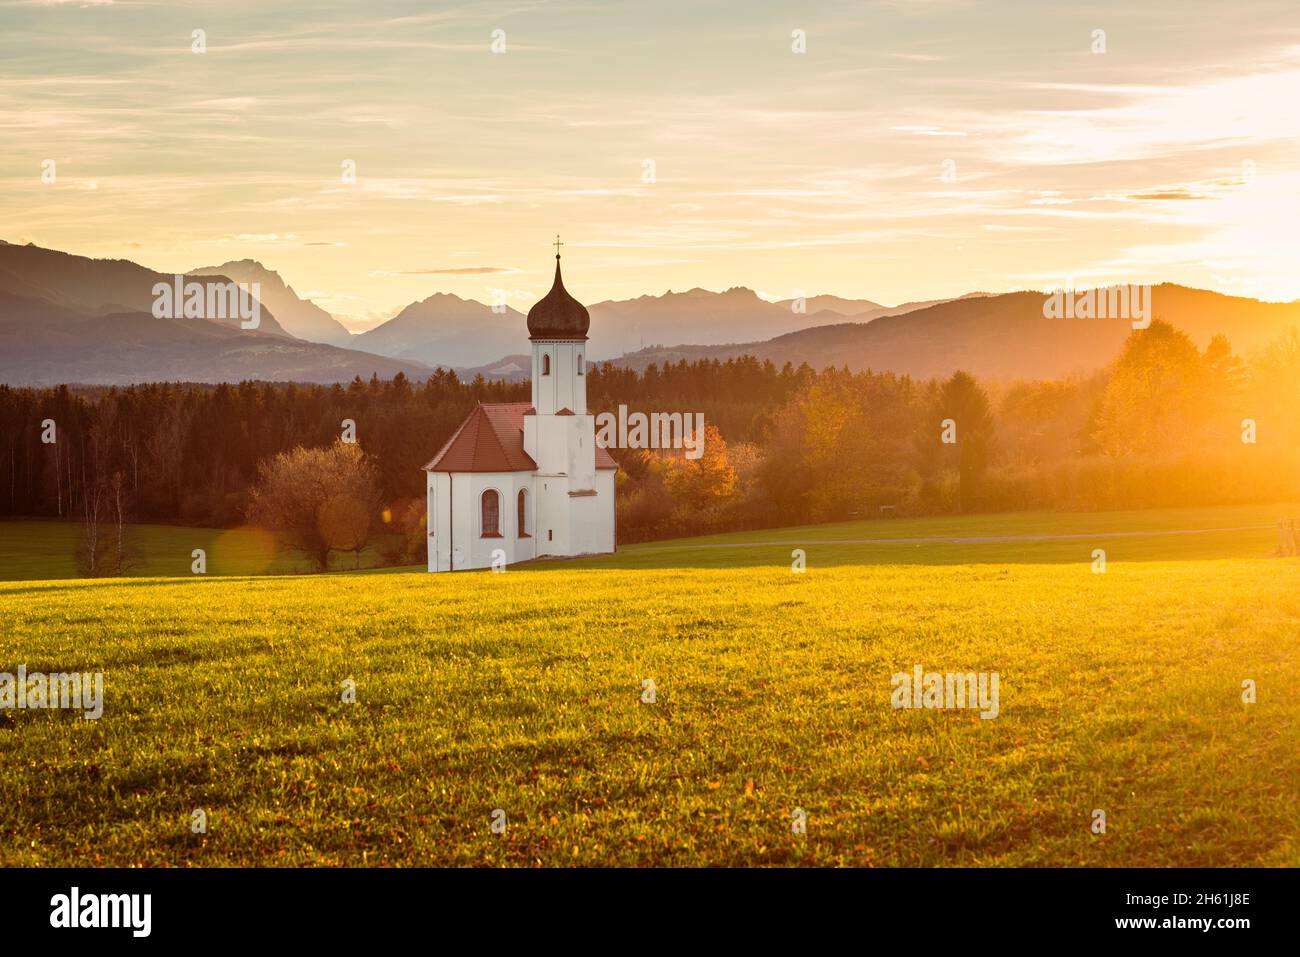 The Baroque chapel of St. Johann above the Loisach Valley and the autumnal Bavarian Alps with Zugspitze in the backlight of the evening sun, Germany Stock Photo